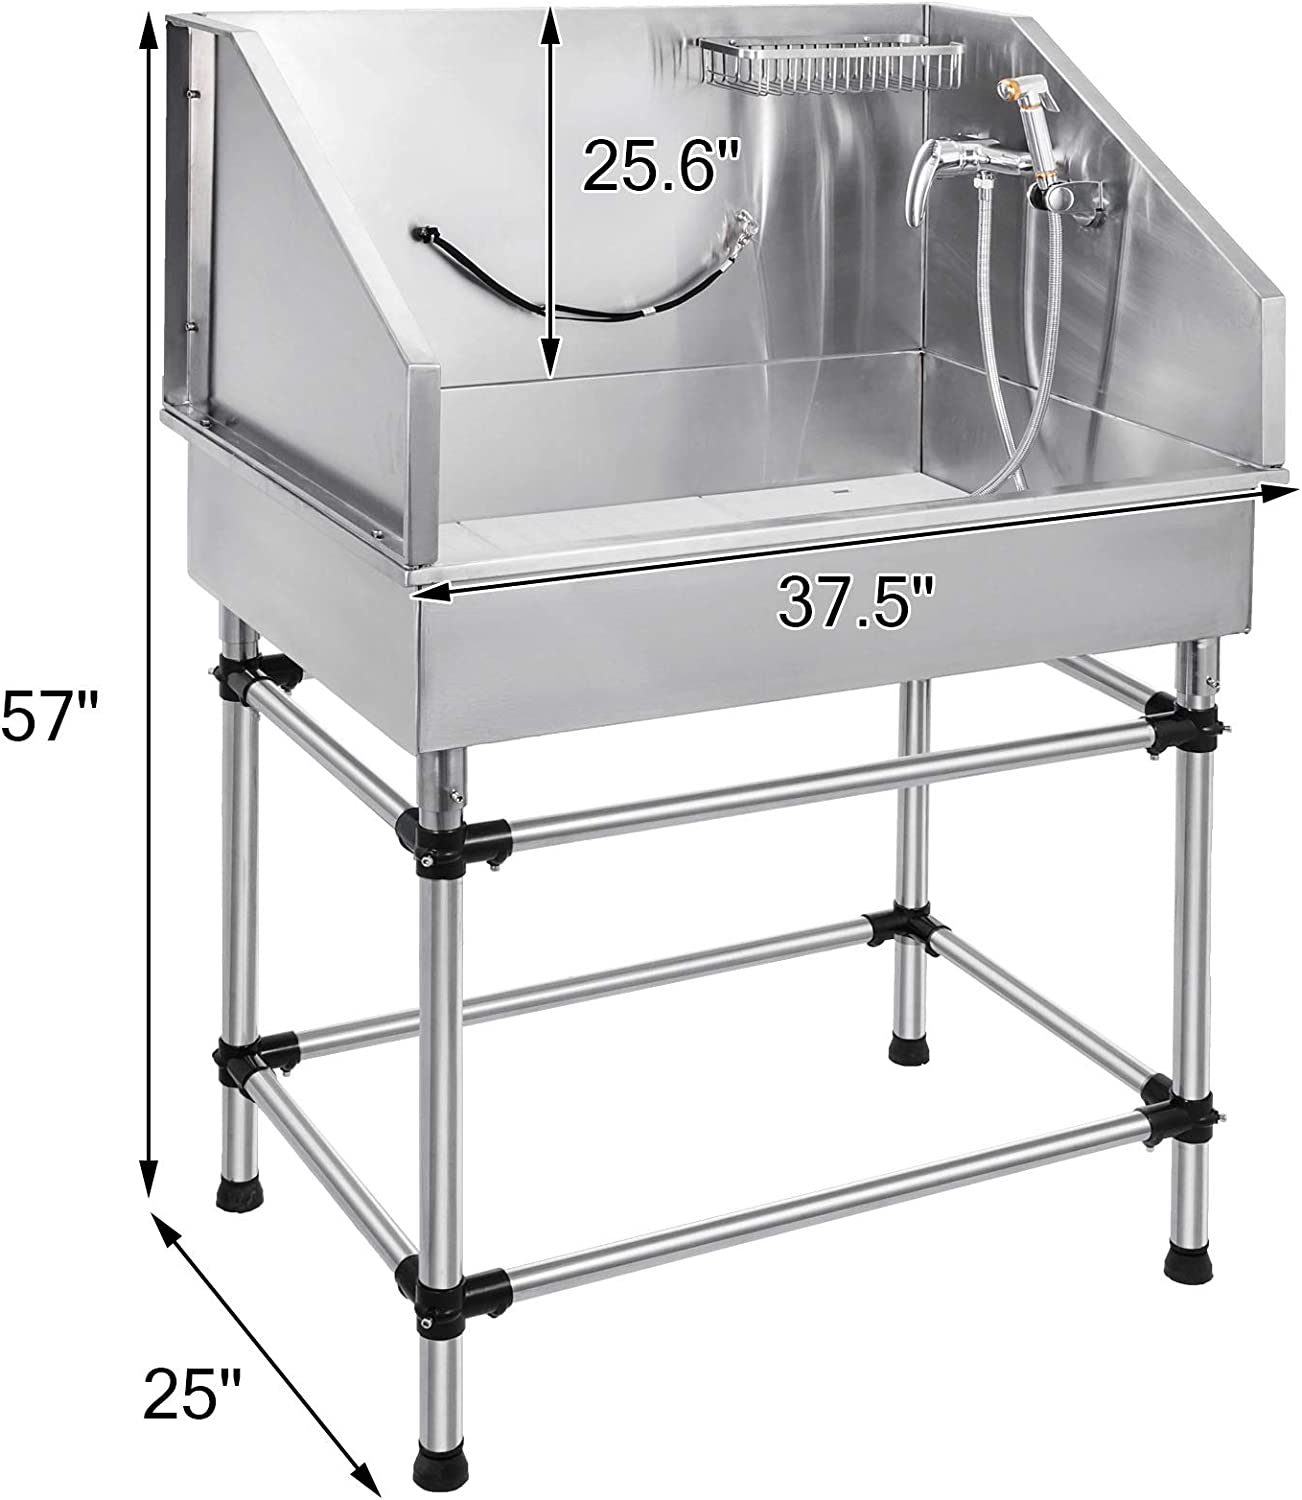  Professional Stainless Steel Pet Bathing Tub Station 